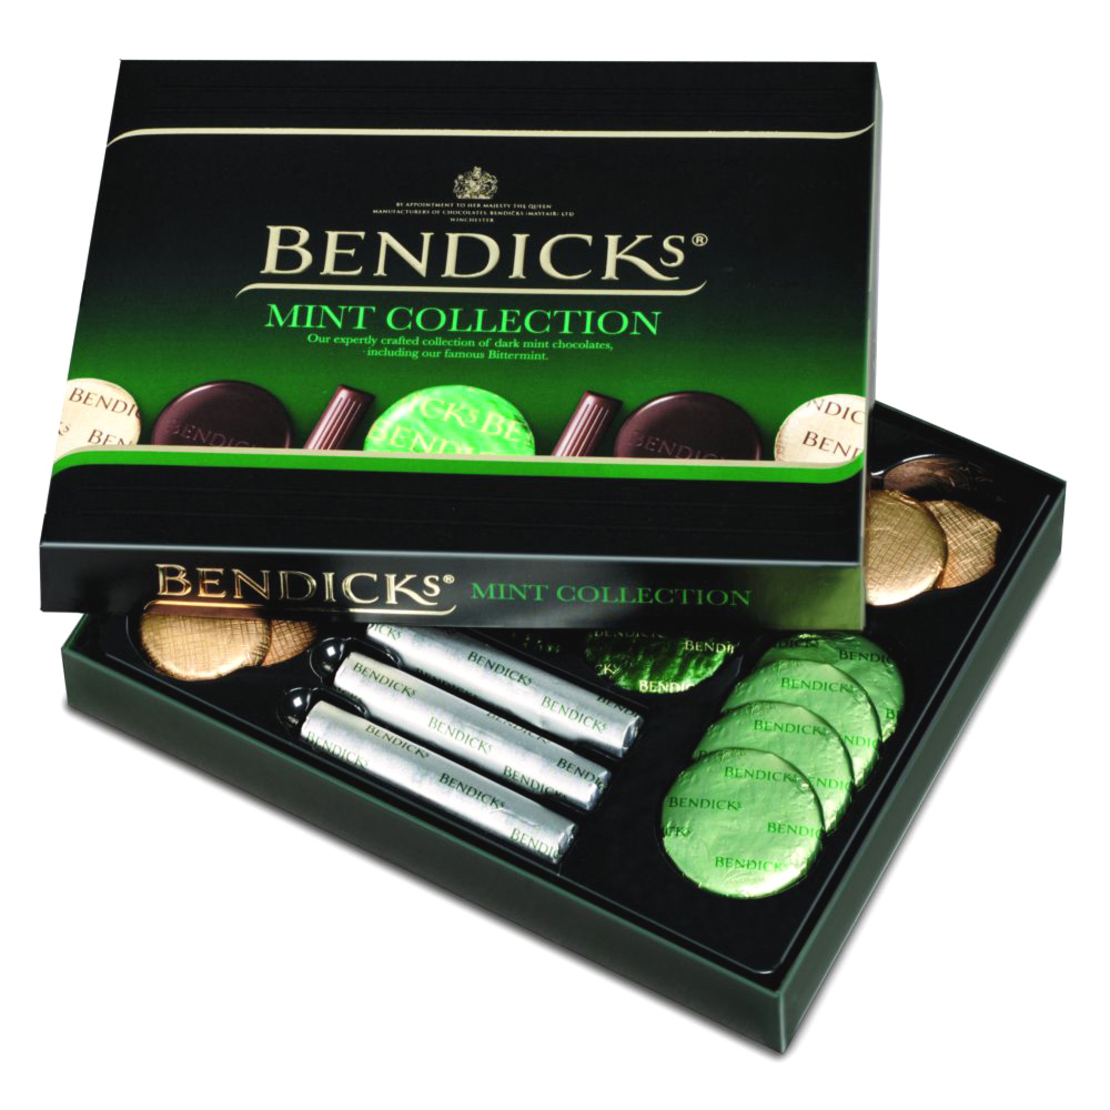 Benedicts Mint Collection